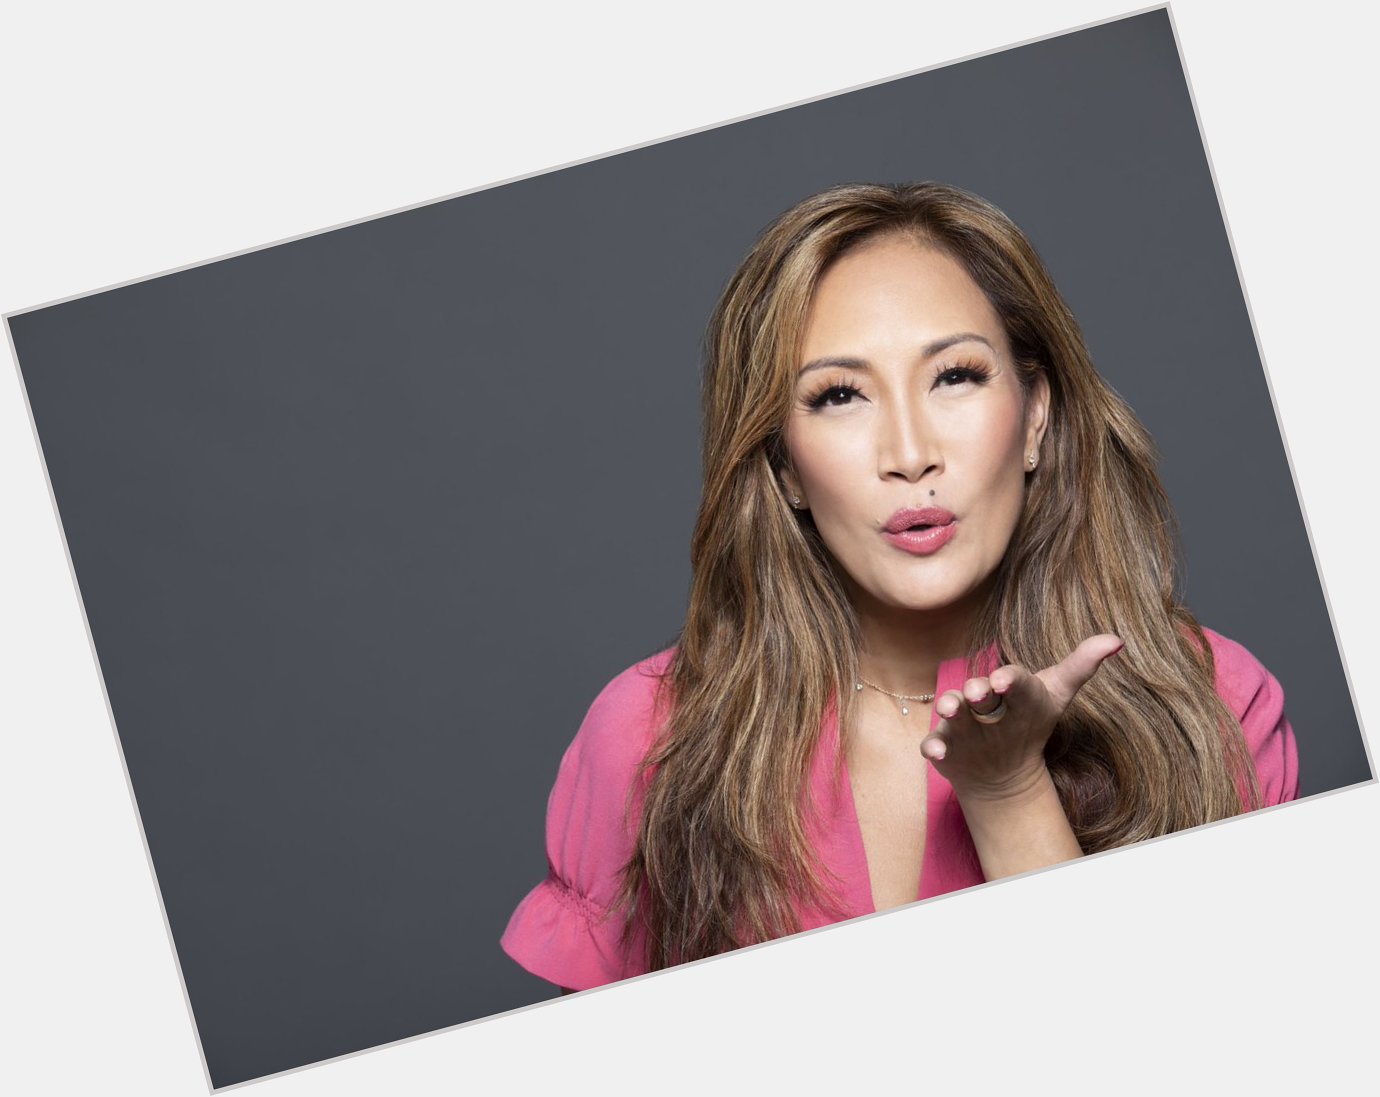 Join us in wishing our new co-host Carrie Ann Inaba, a happy birthday!    